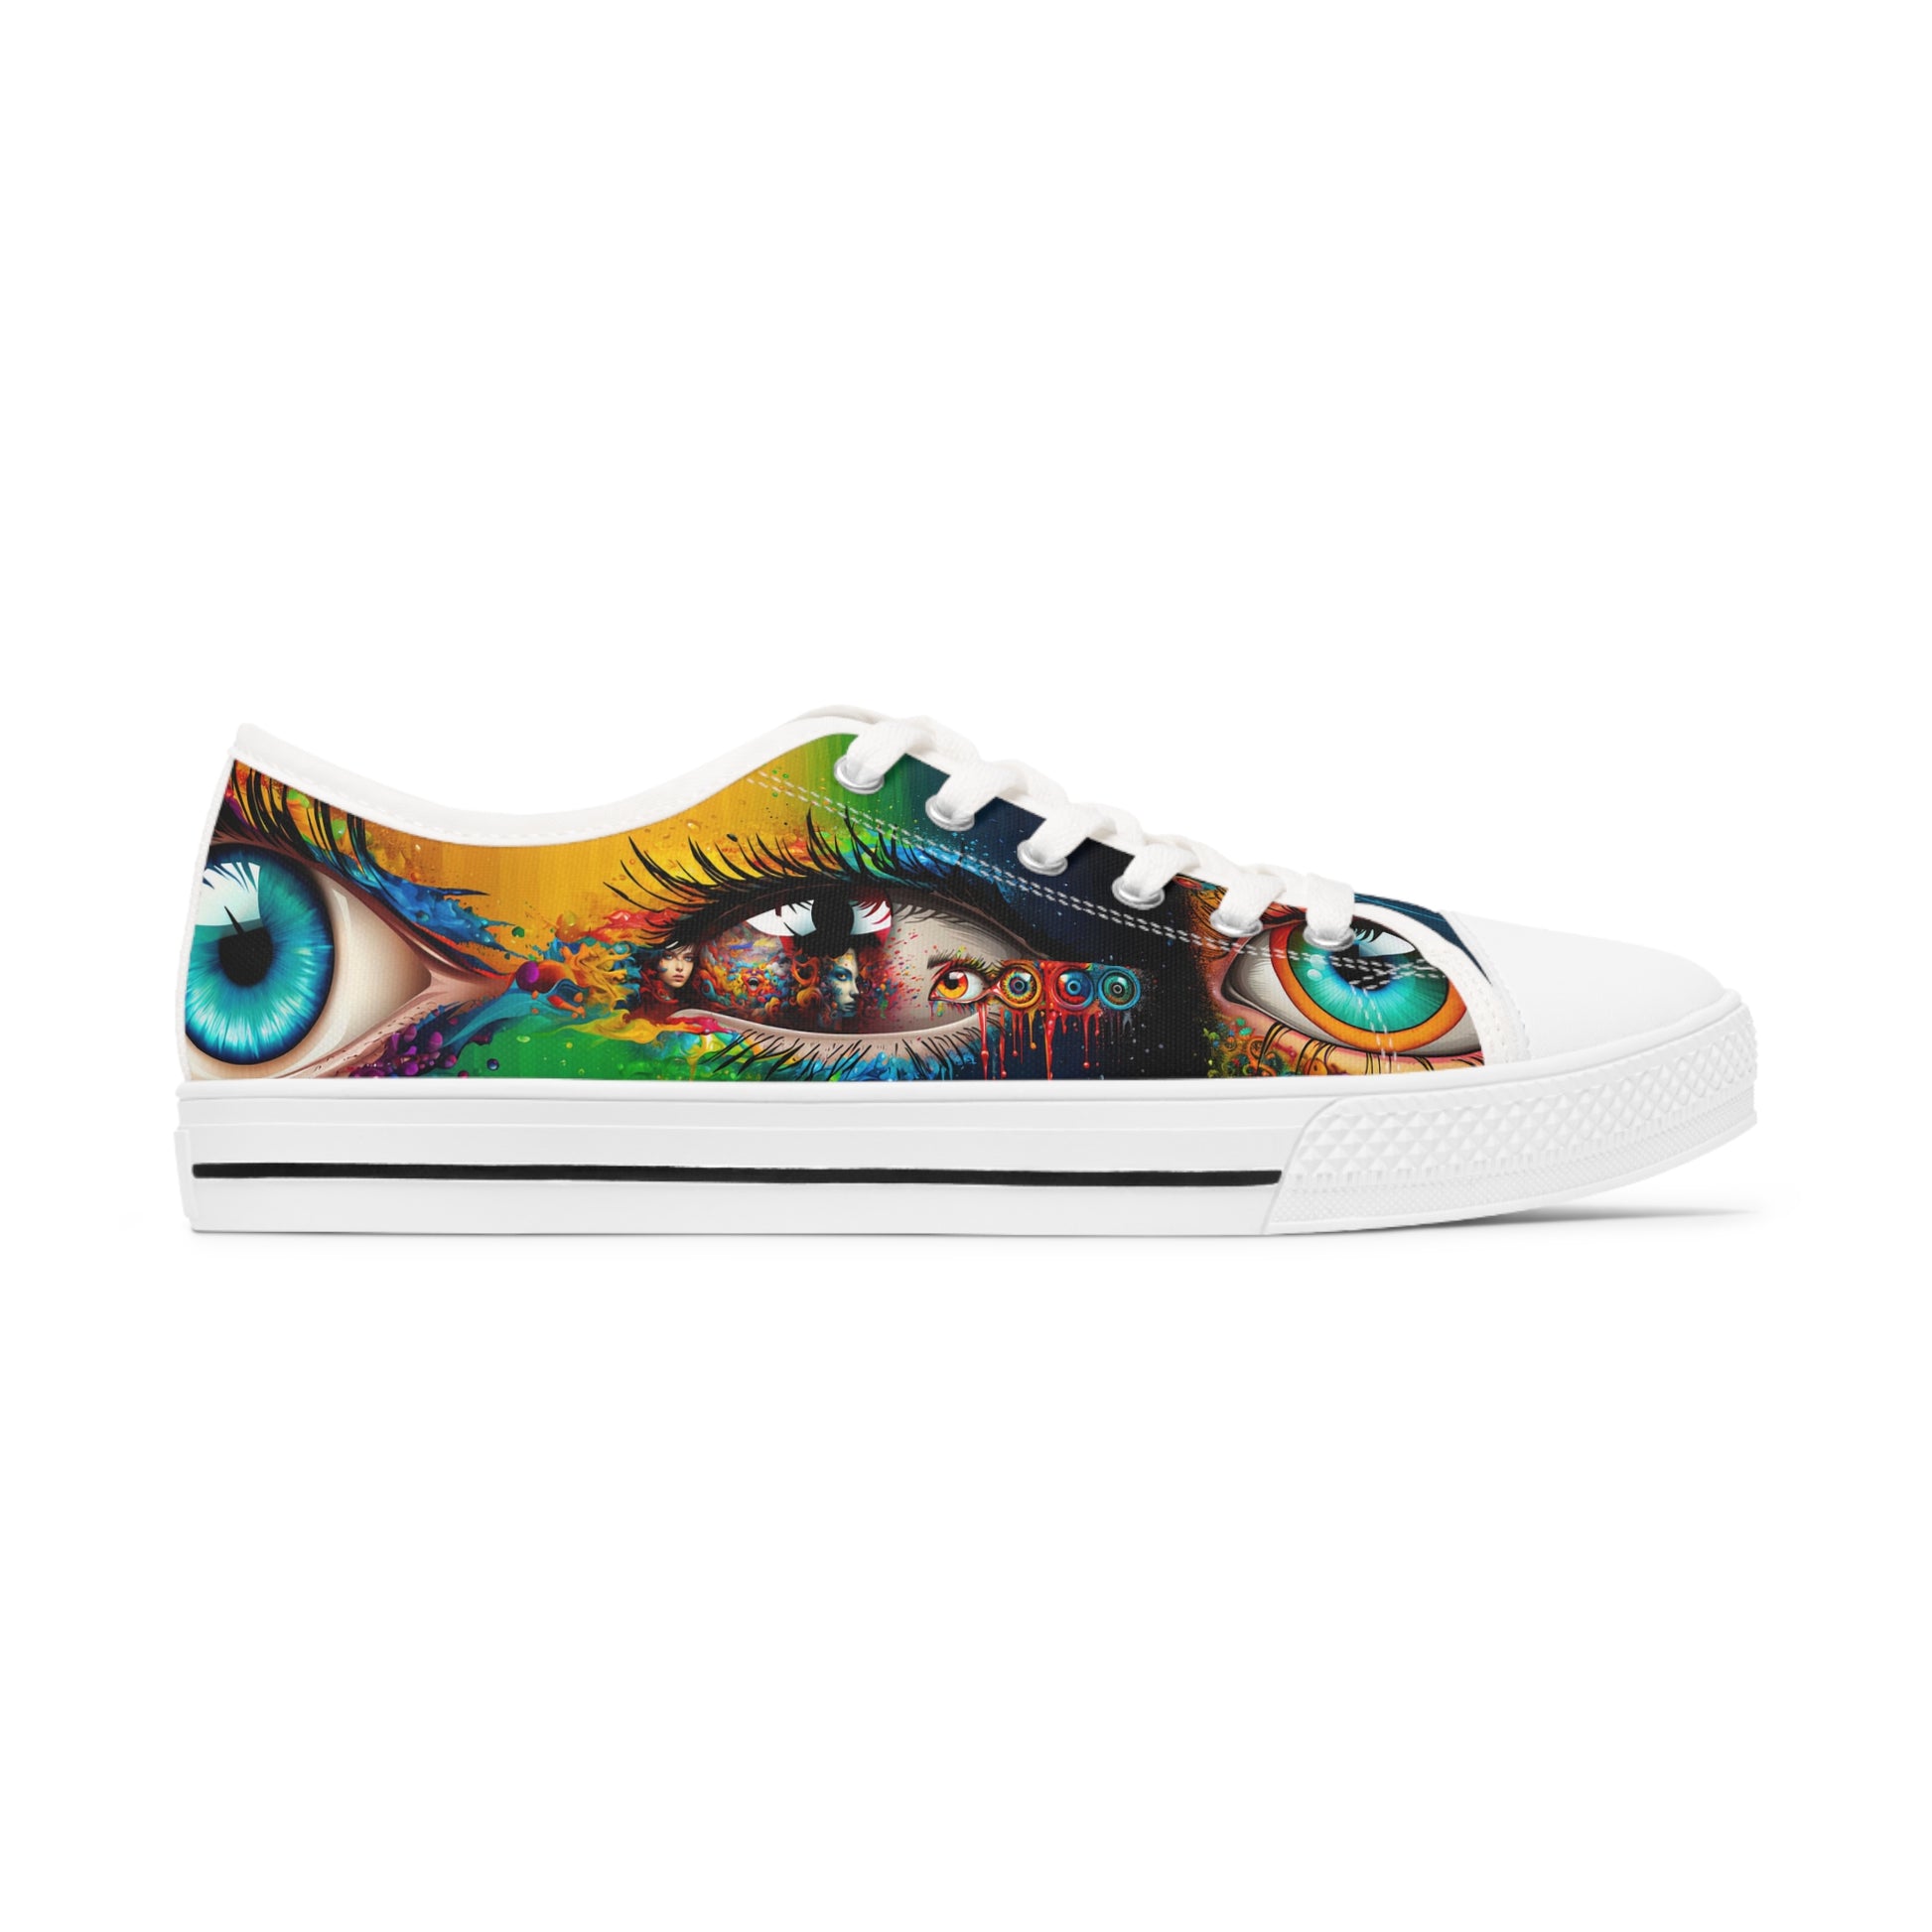 Unique Low Top Sneakers - Stashbox Psychedelic Design - #EyeCatchyShoes #FunkyFootwear #StashboxCreations